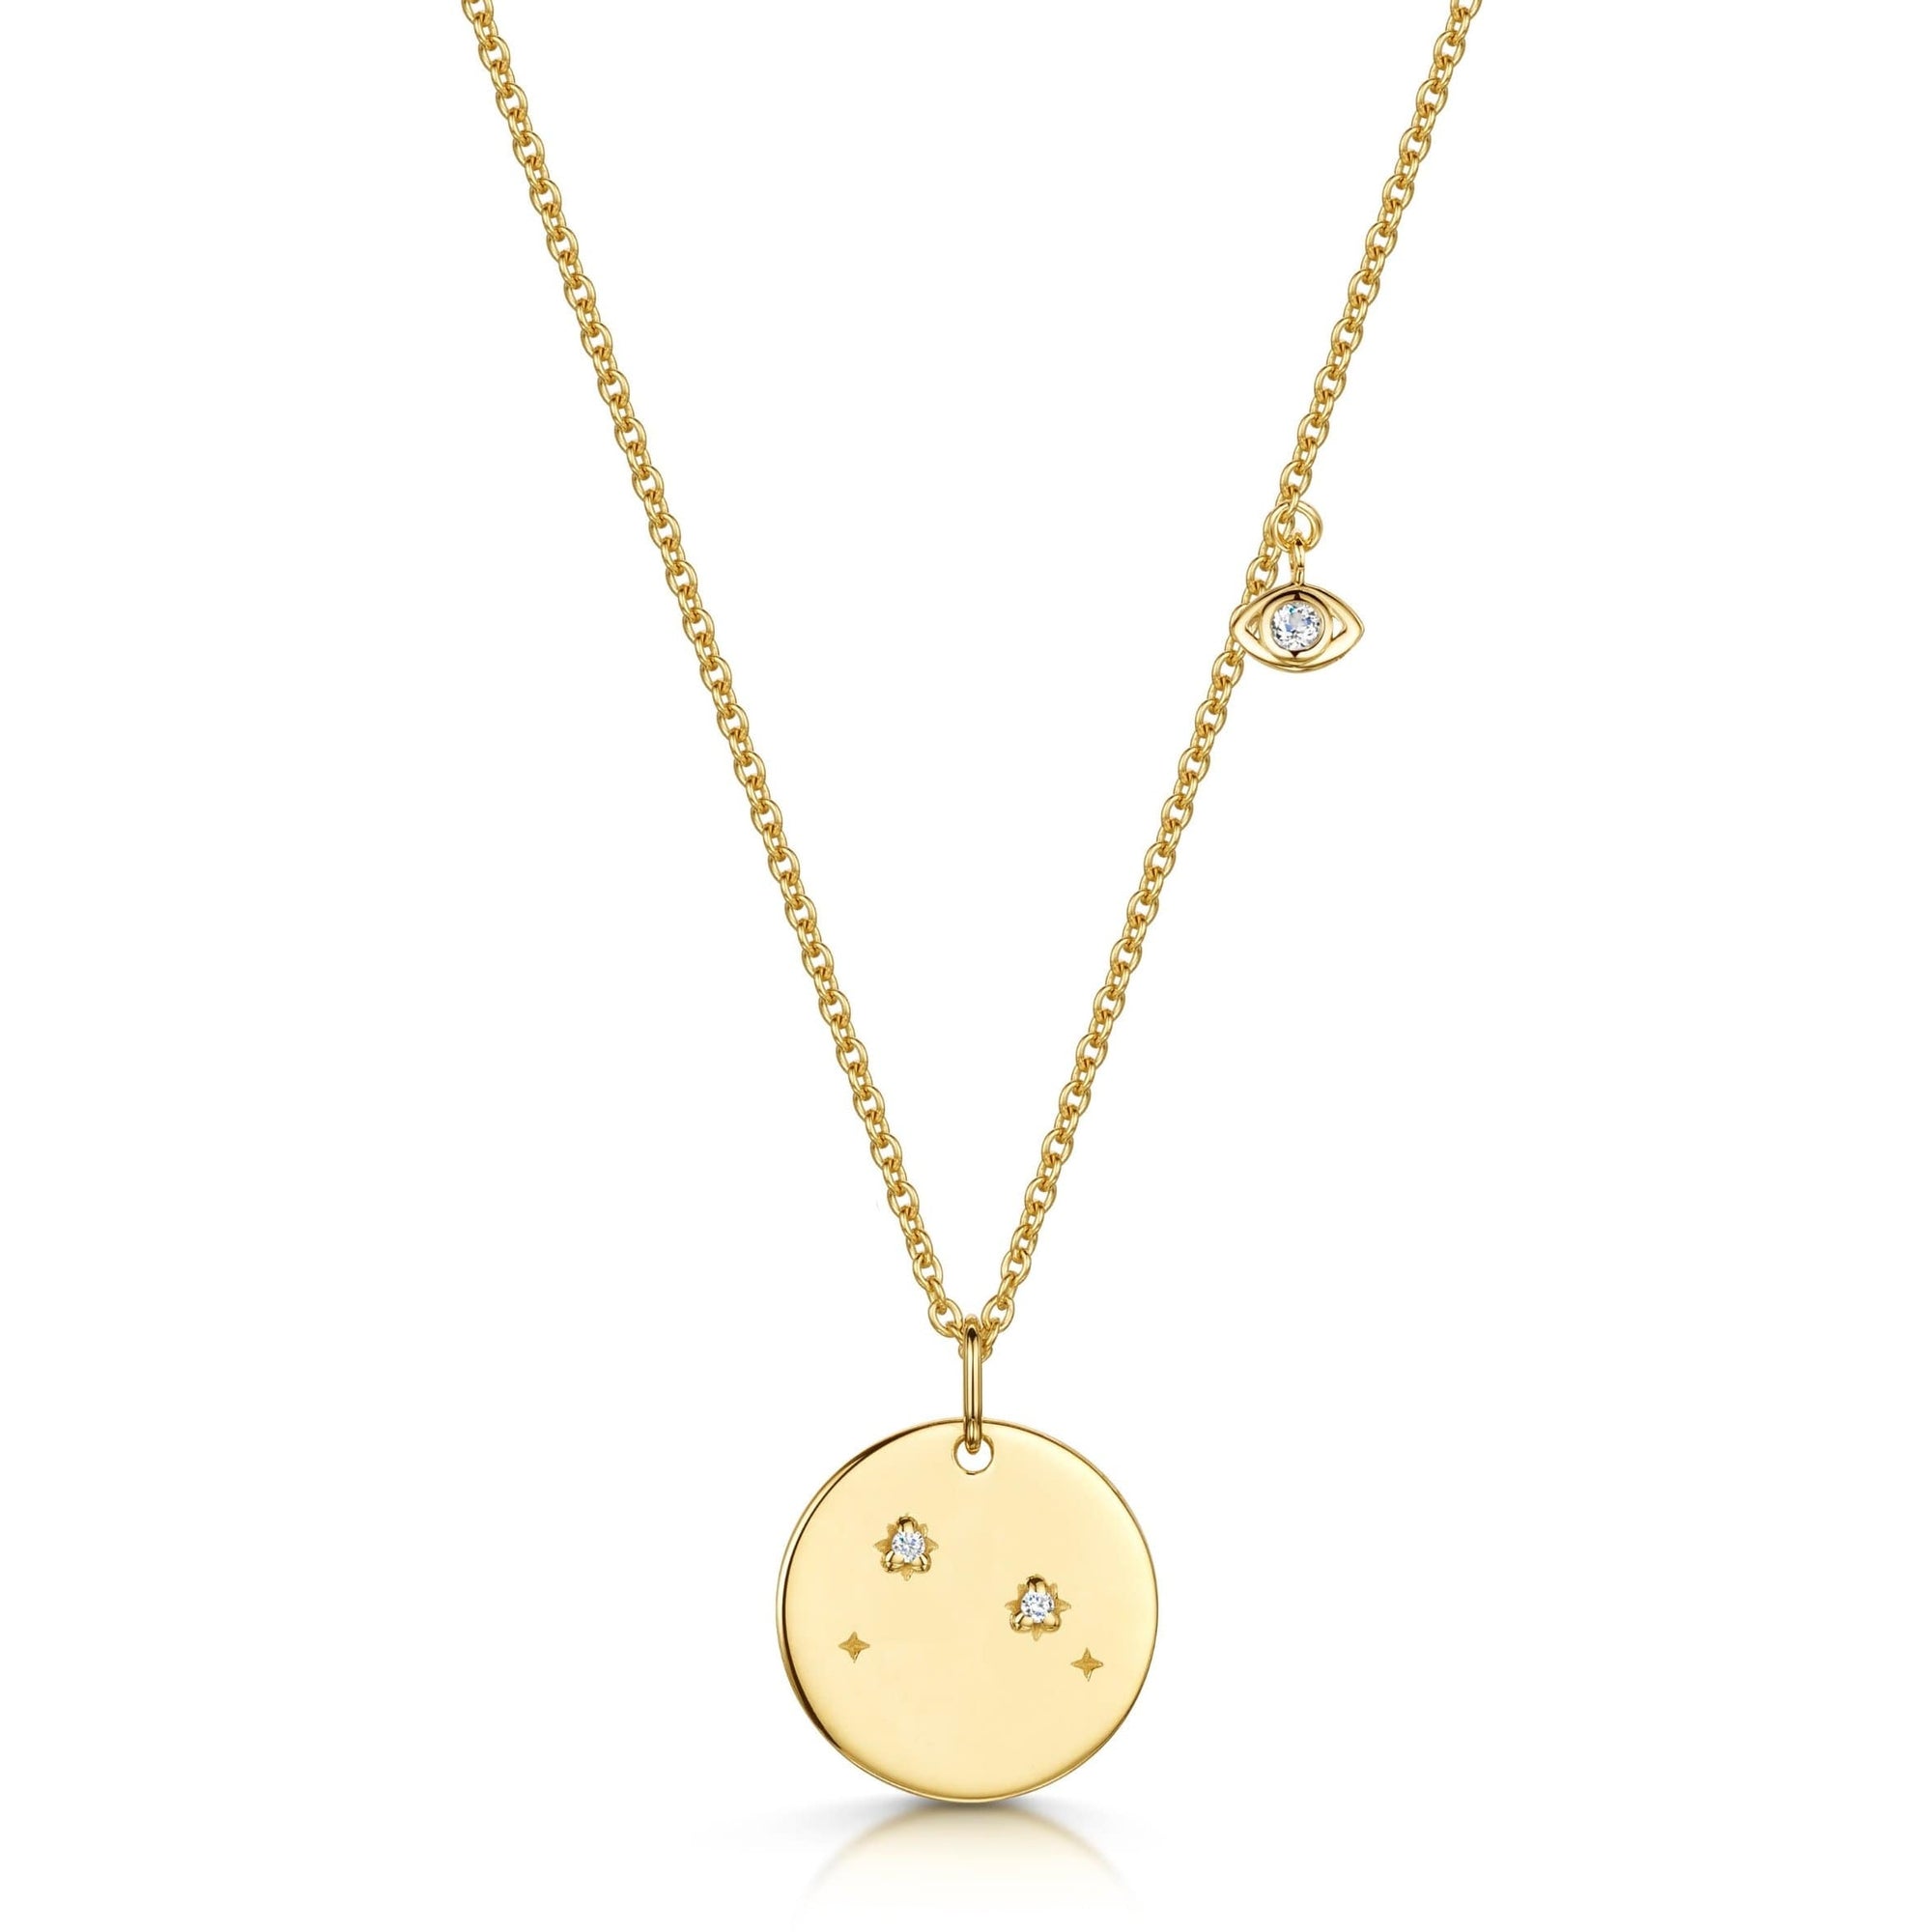 Fervor Montreal Necklace Aries Double-Sided Zodiac & Constellation Necklace